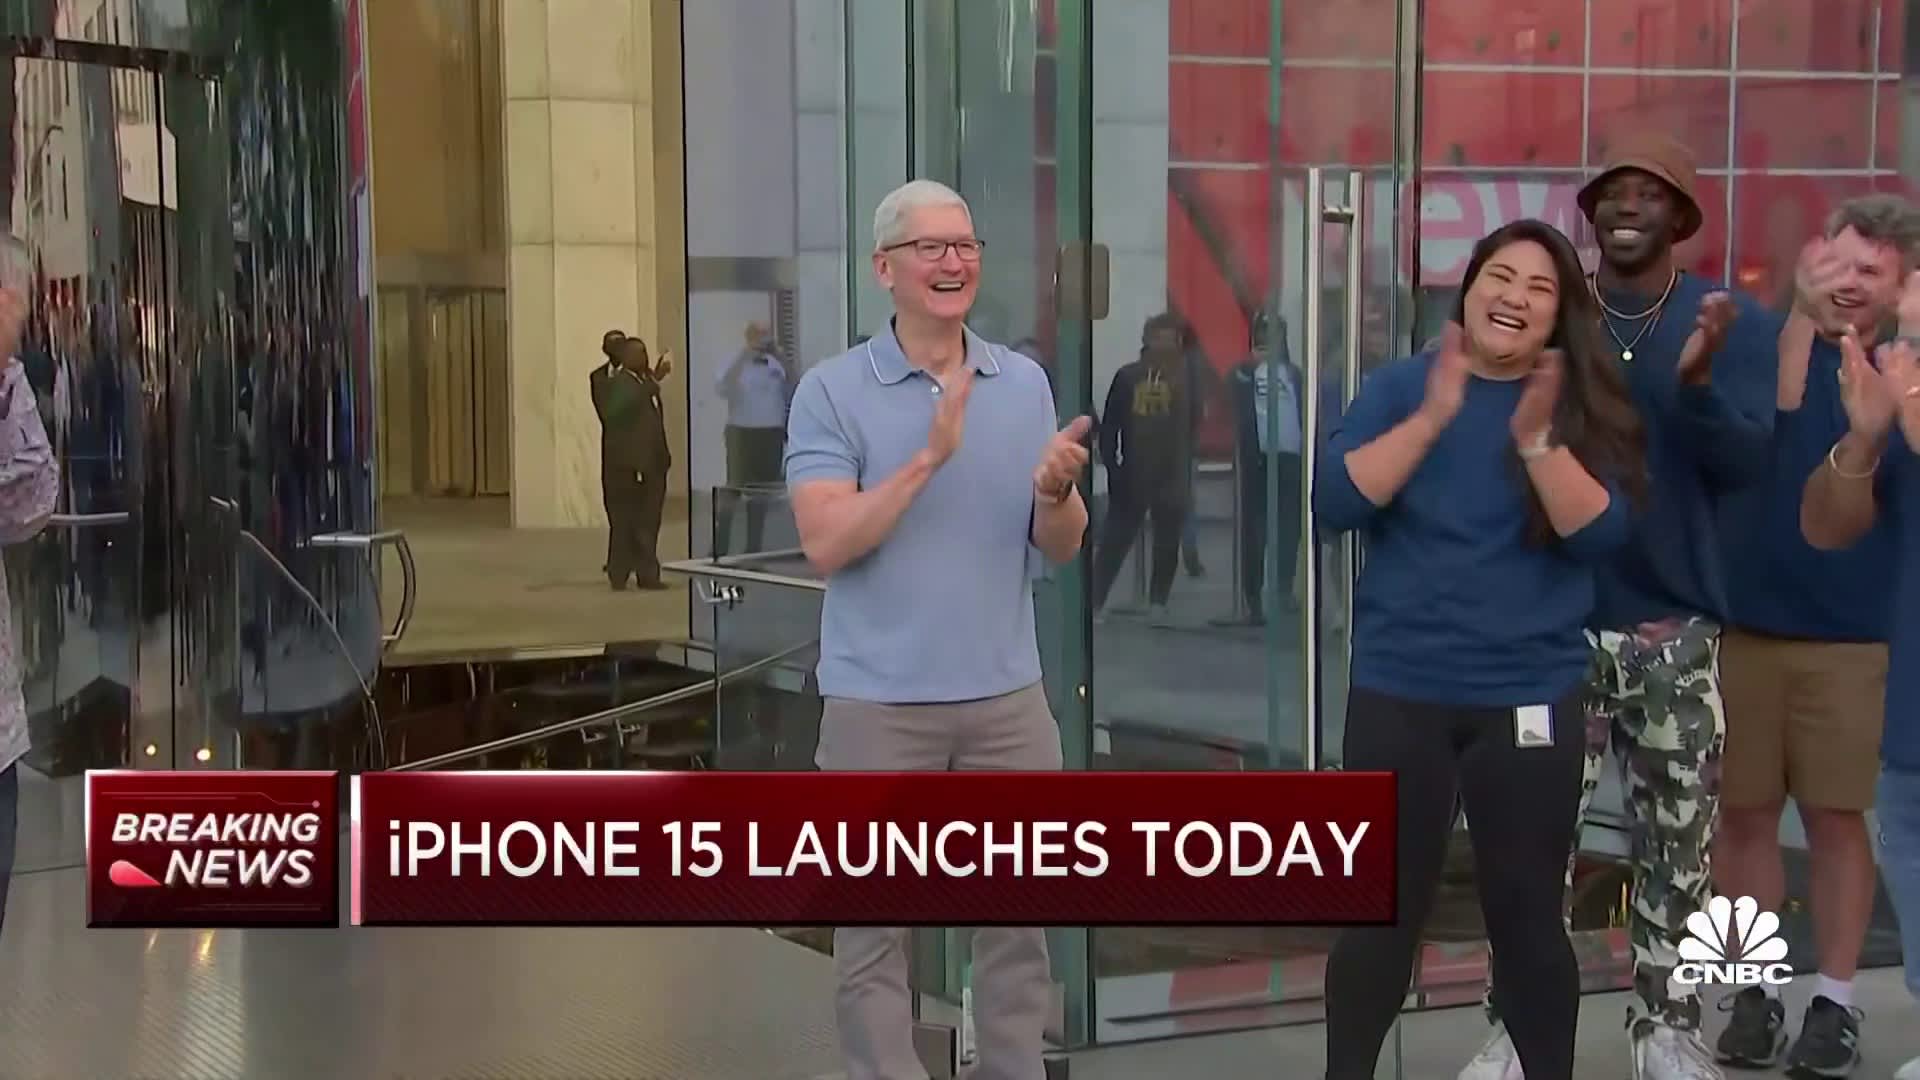 iPhone 15 goes on sale: Apple CEO Tim Cook opens Fifth Avenue Apple store